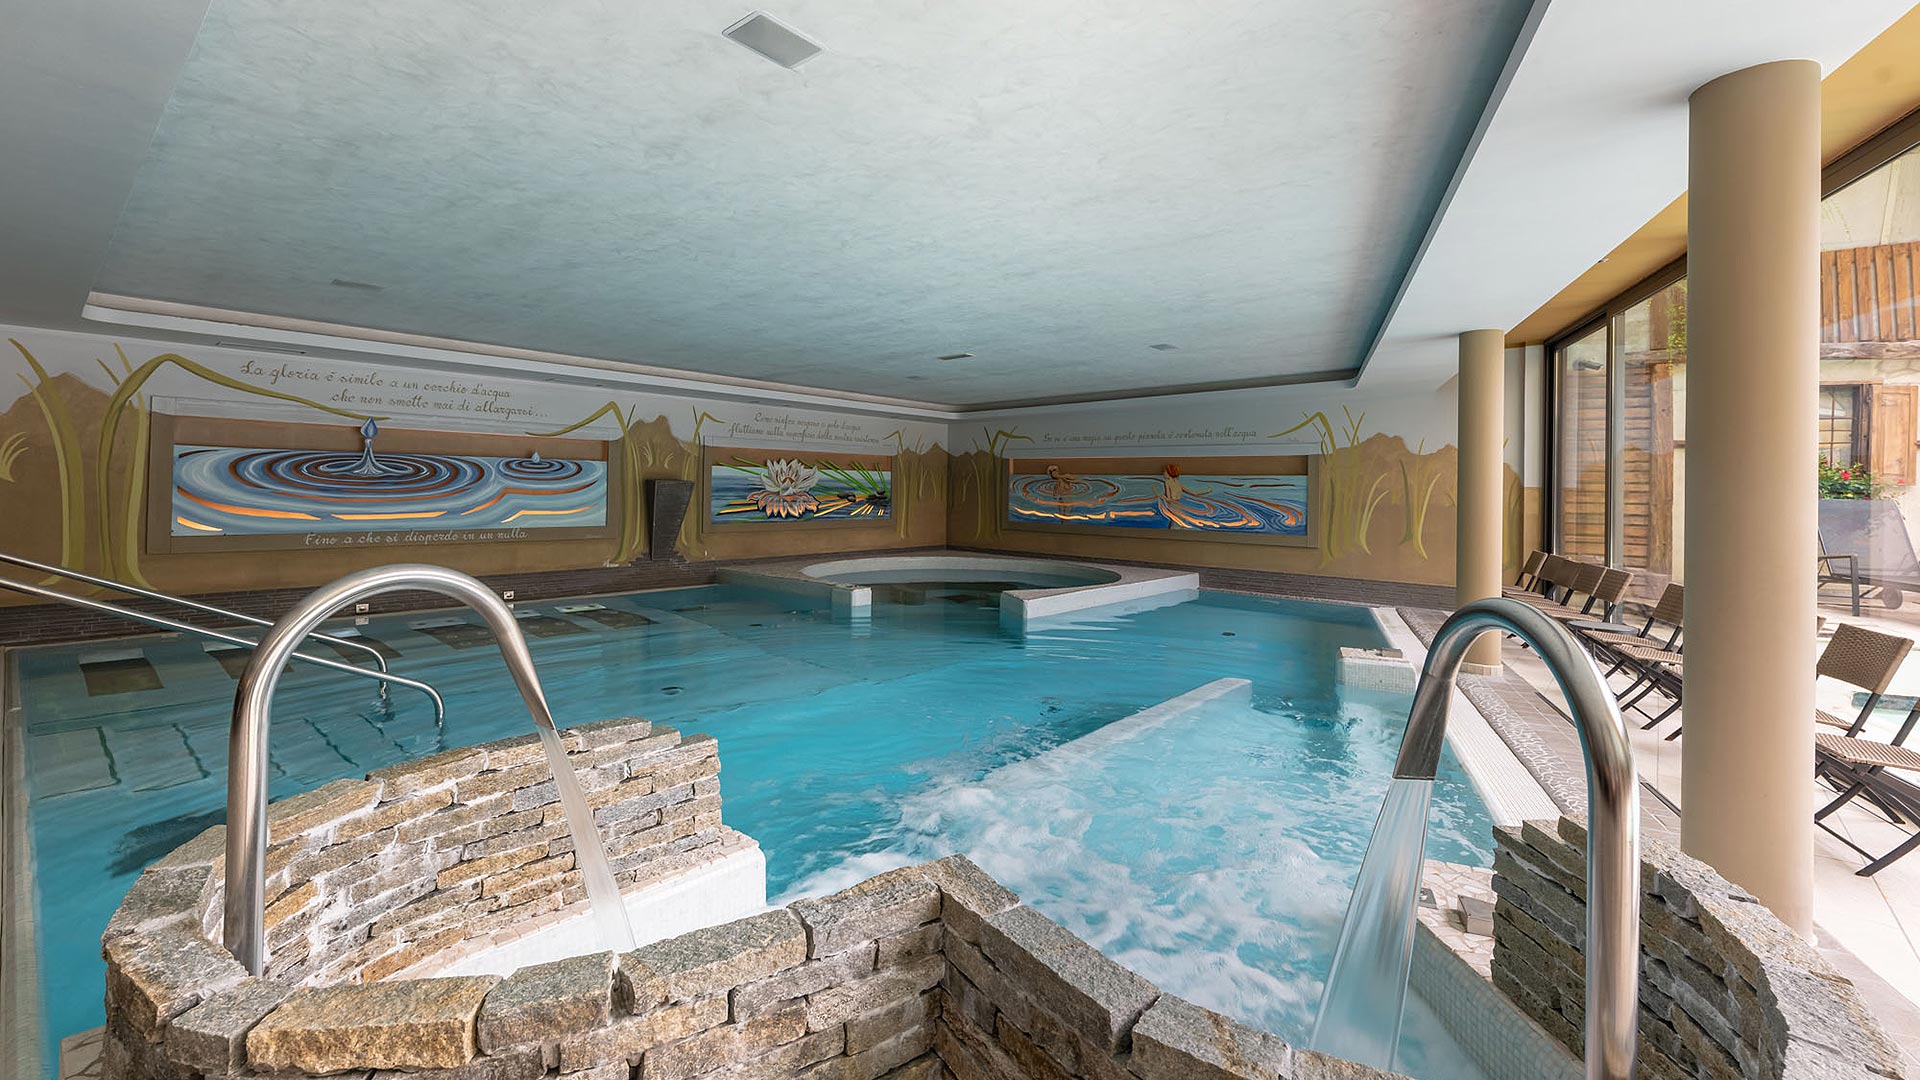 In our hotel, enjoy a day of wellness with a whirlpool and biosauna and a wide range of personal care treatments.